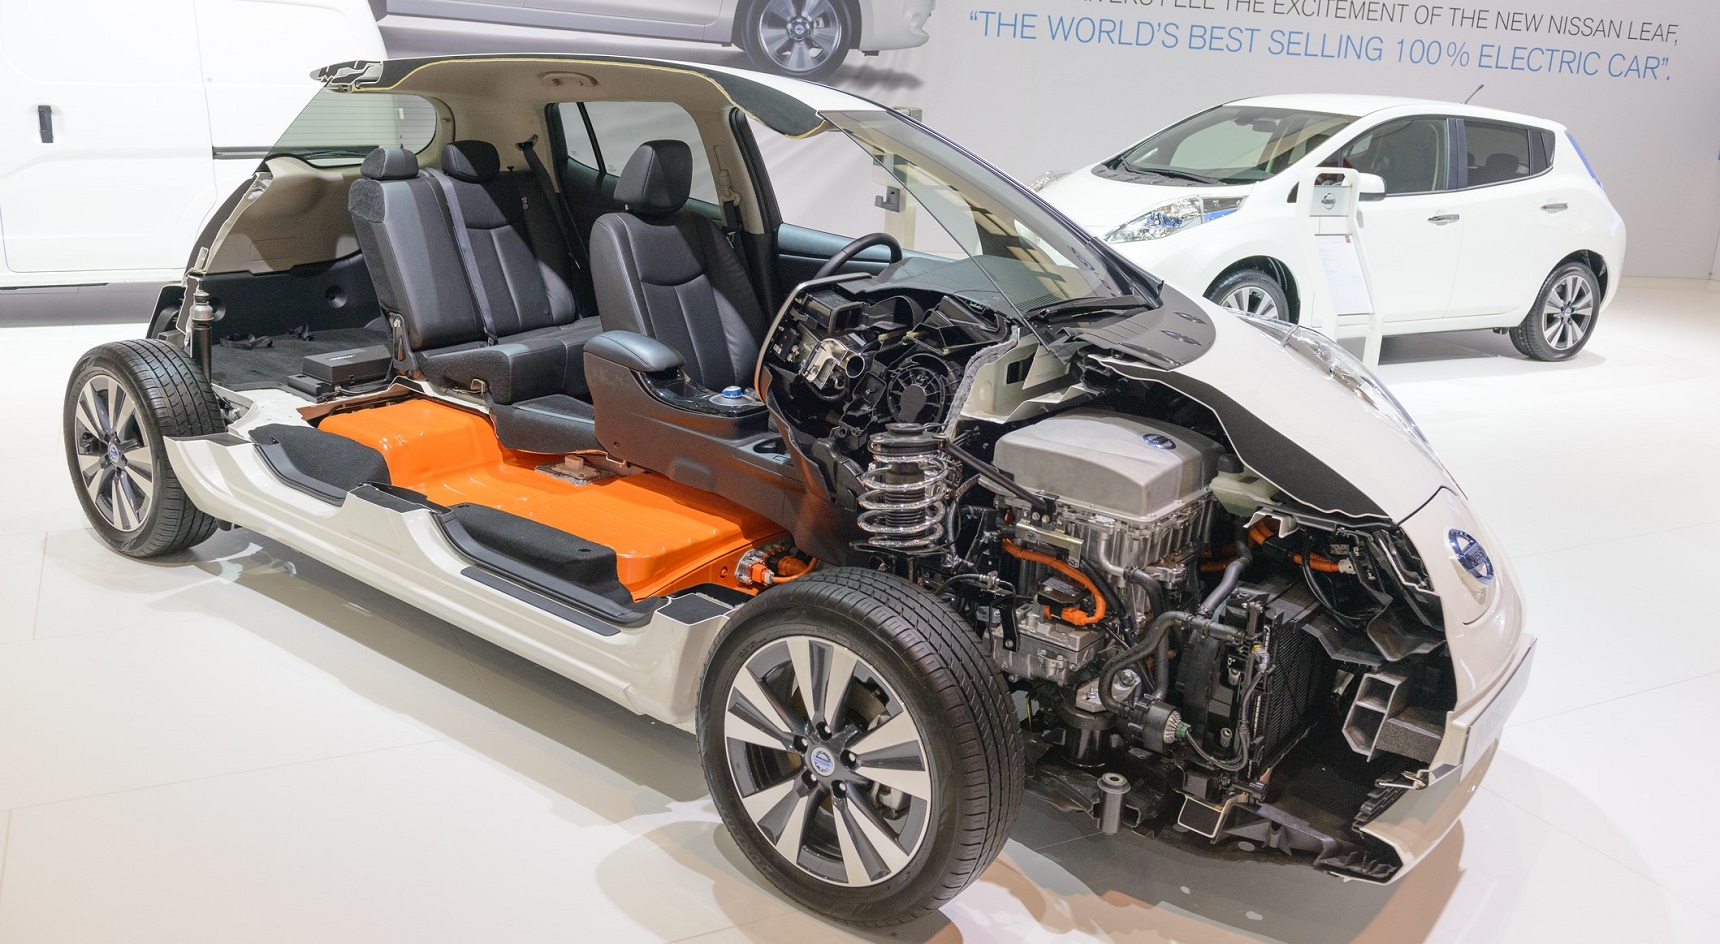 The Nissan Leaf uses repurposed clothes as sound insulation 